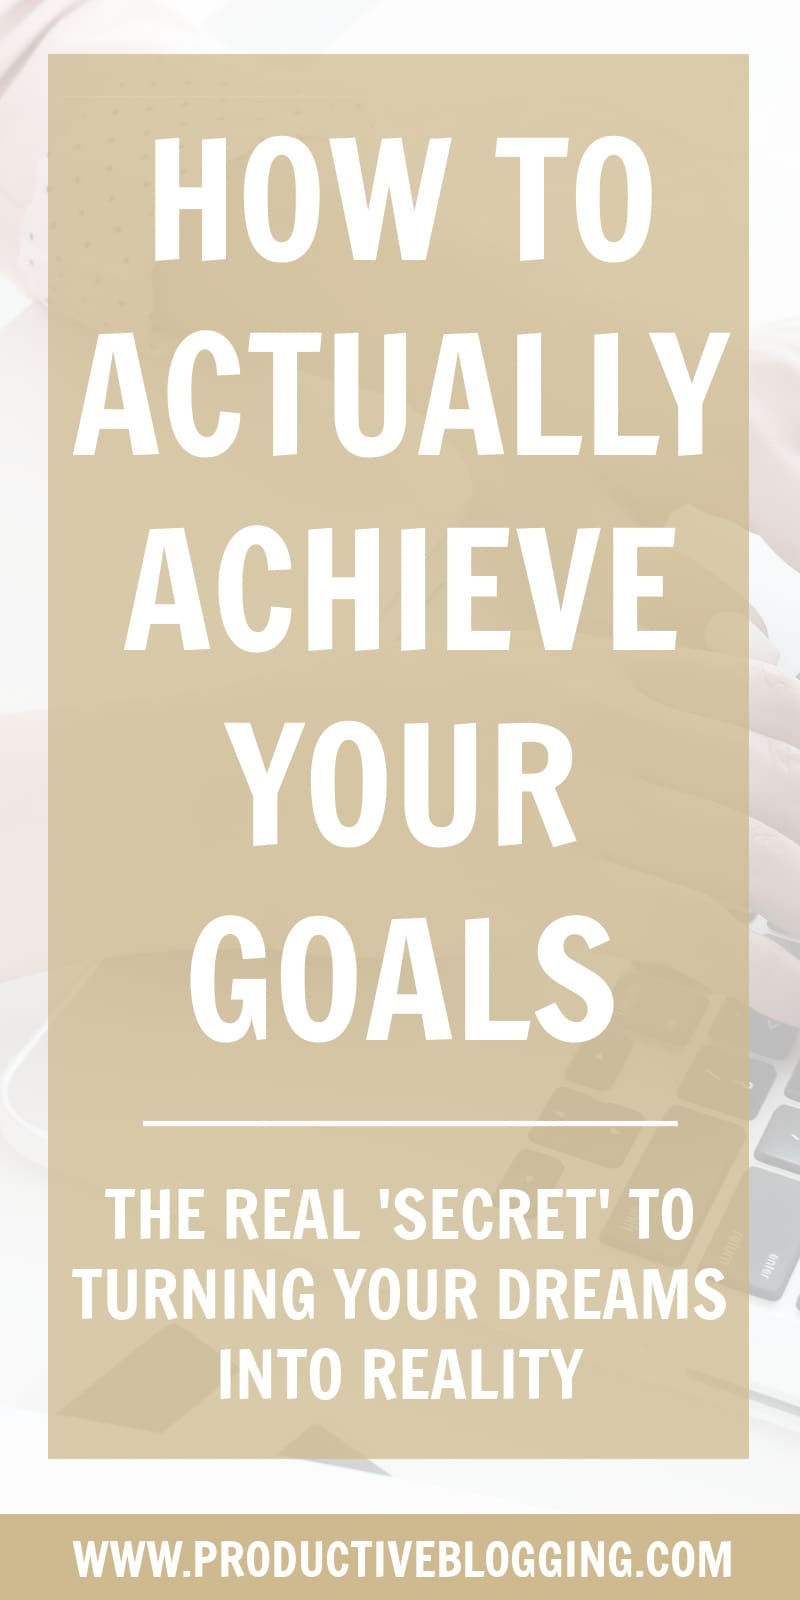 Setting goals is important, but if you truly want to turn your dreams into reality you need to create an action plan – and then take consistent action on your plan. Here’s how to actually achieve your goals. #goalsetting #goalplanning #yearlyactionplan #monthlyactionplan #actionplan #takeconsistentaction #prioritize #goalsuccess #achieveyourgoals #productivityhabits #productivityhacks #boostproductivity #timemanagement #goals #blogginggoals #bloggingtips #productivitytips #productiveblogging